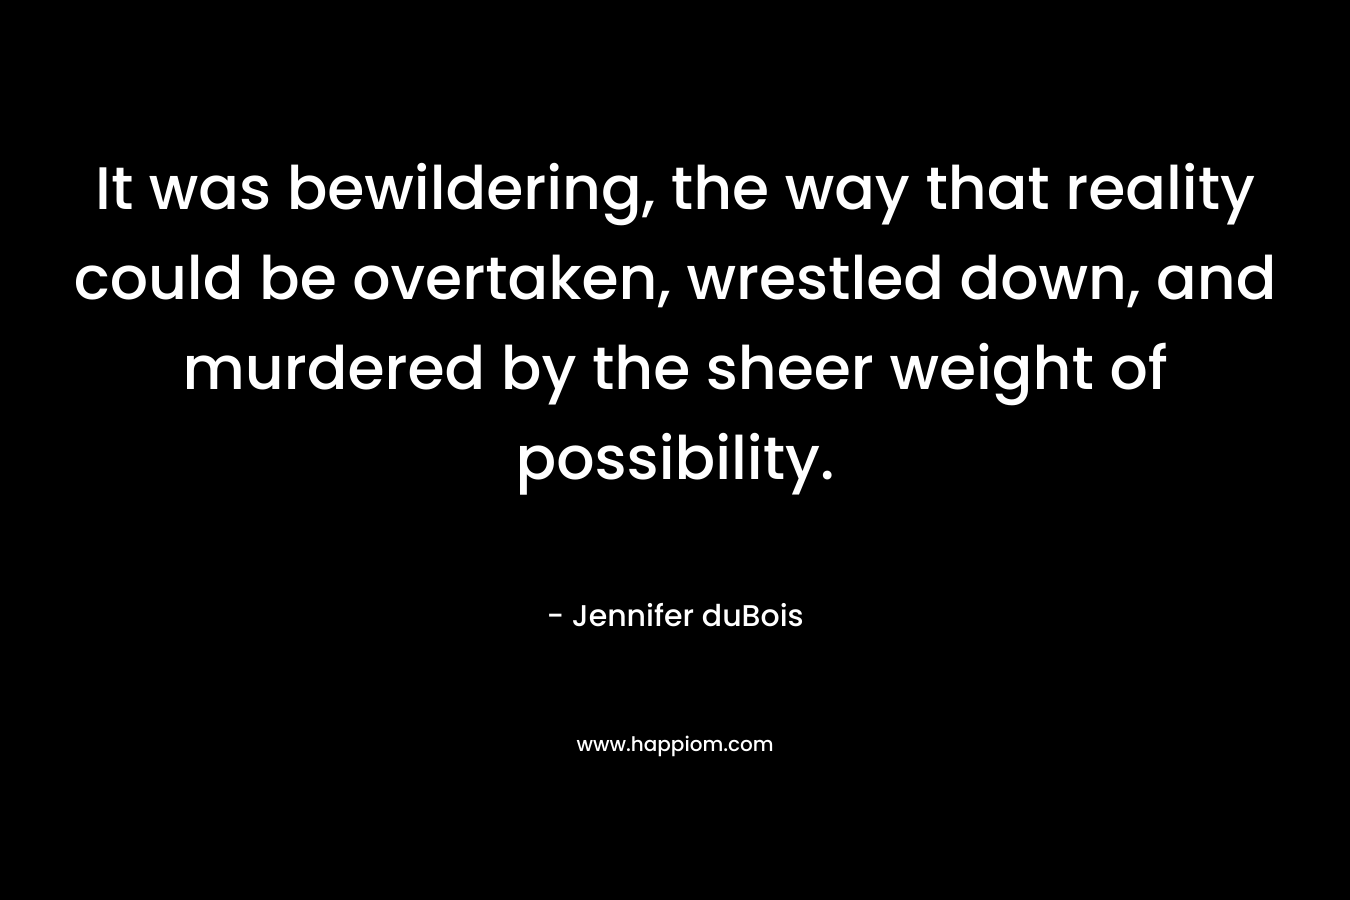 It was bewildering, the way that reality could be overtaken, wrestled down, and murdered by the sheer weight of possibility.